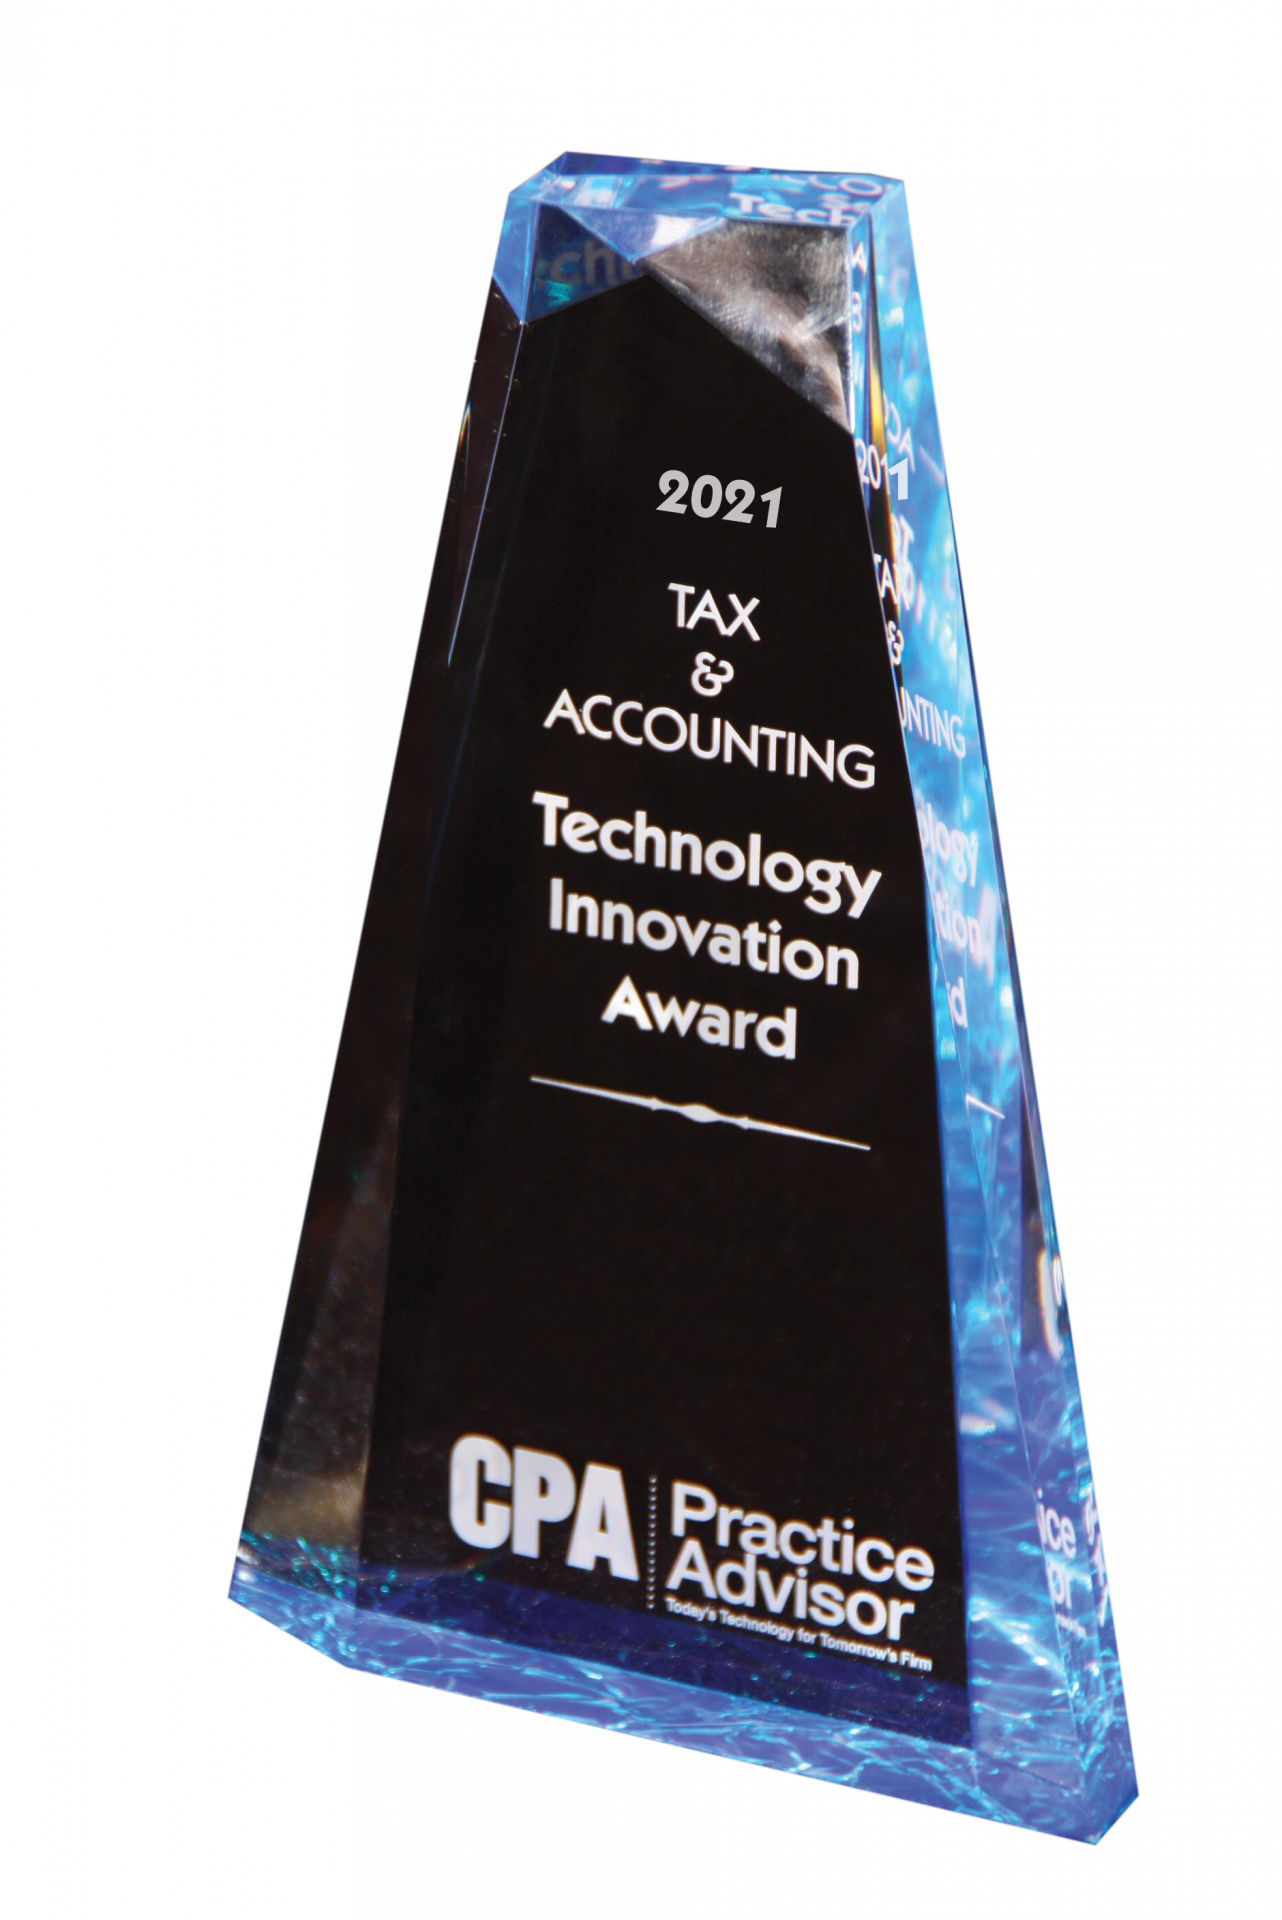 2021 Innovation Awards Highlight Top Technologies for Accounting